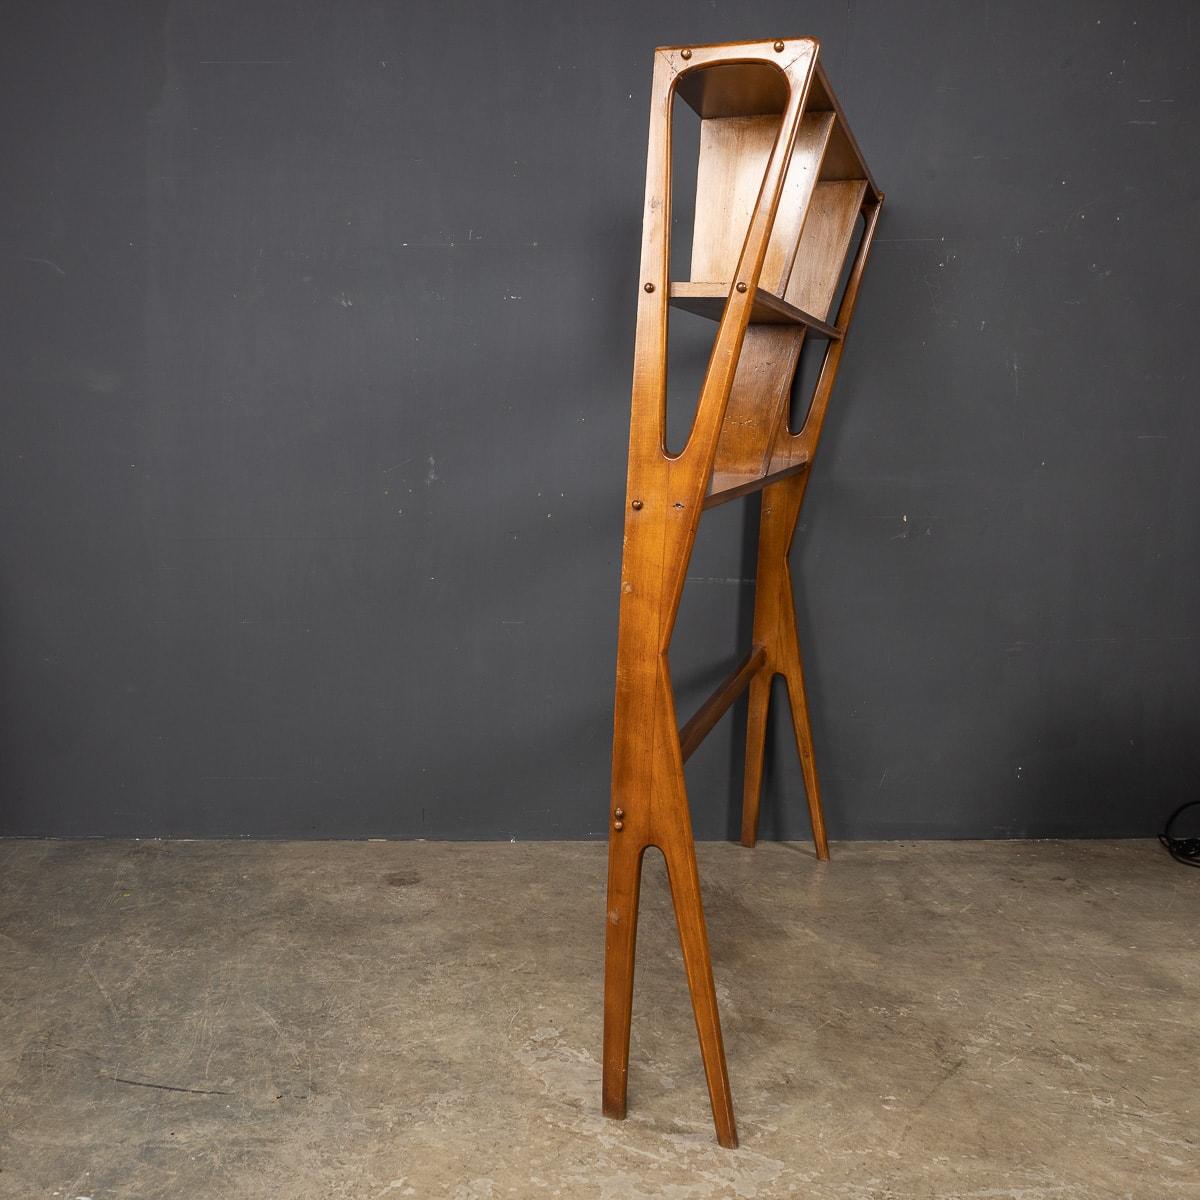 20th Century Italian Beech Wood Bookcase / Room Divider, c.1950 For Sale 1